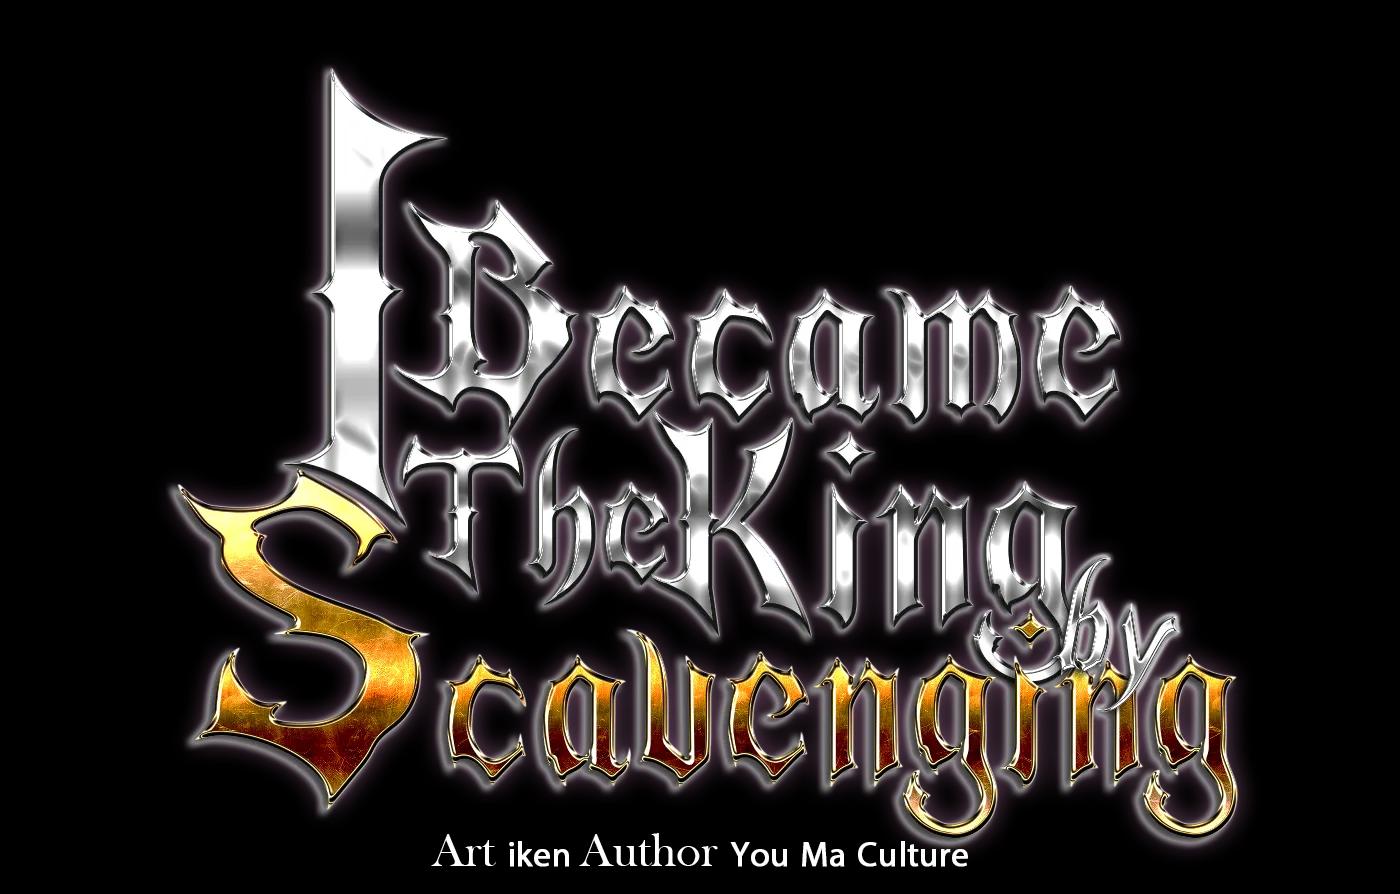 I Became The King by Scavenging